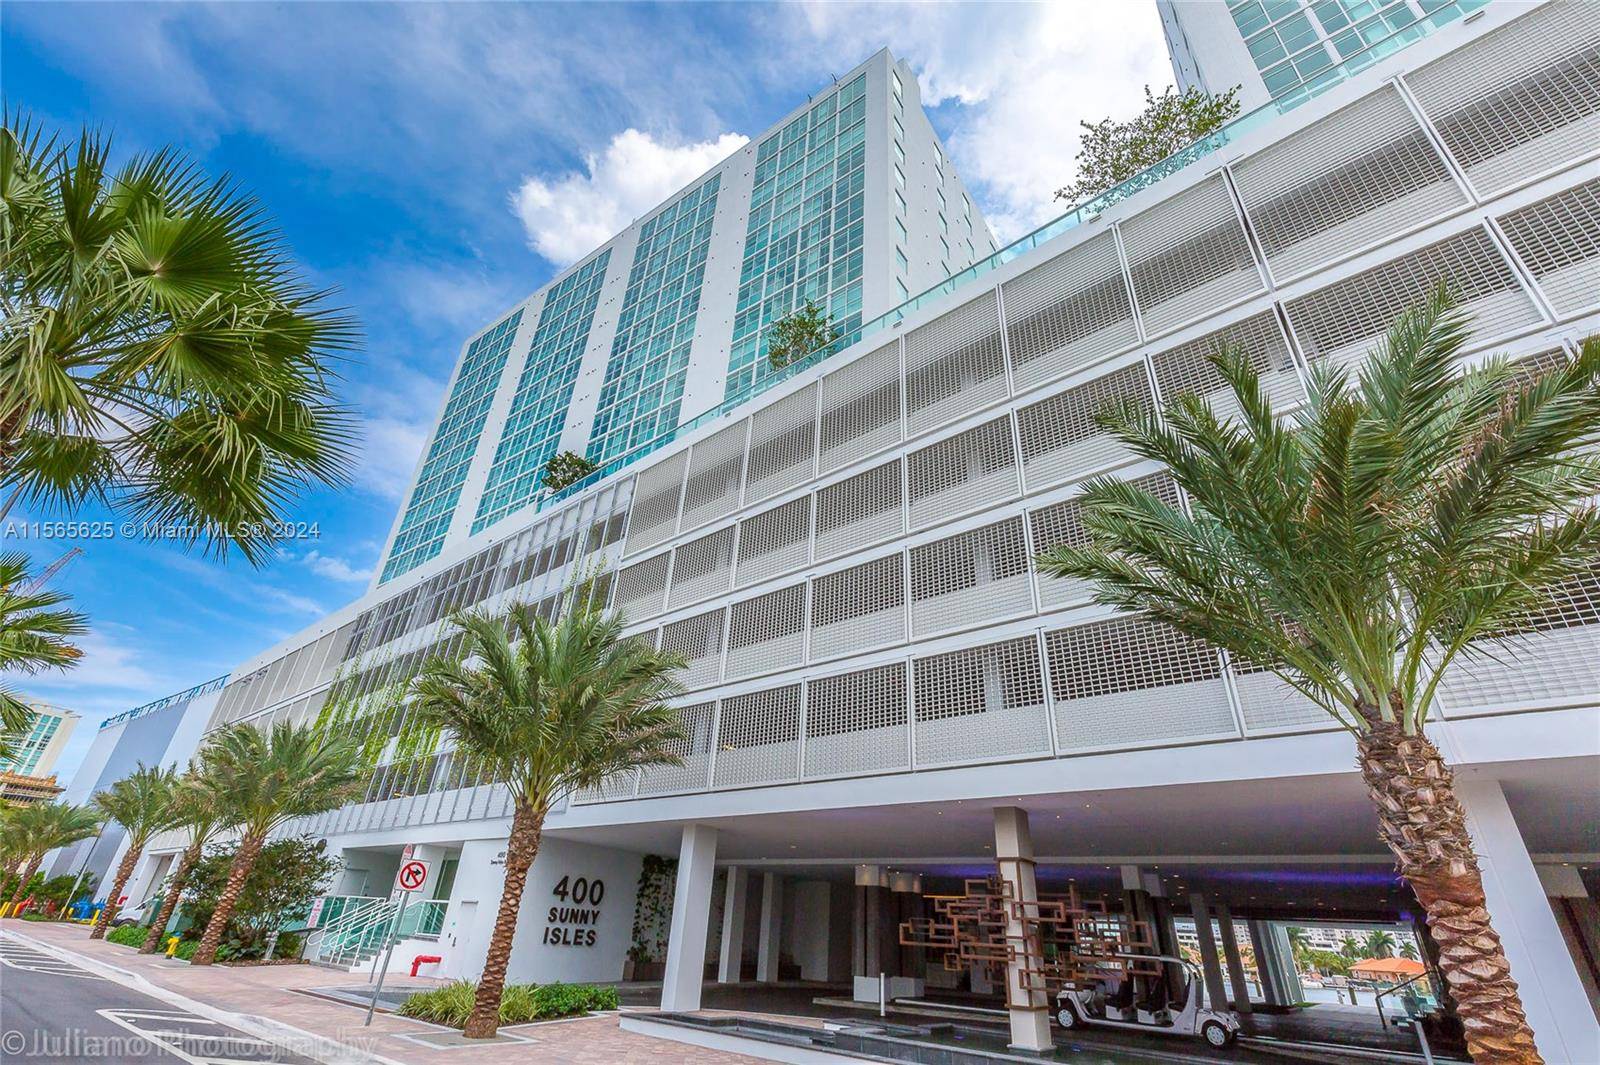 BEAUTIFUL 2 bedrooms, 1 convertible den, 3 baths in a brand new building in Sunny Isles Beach.